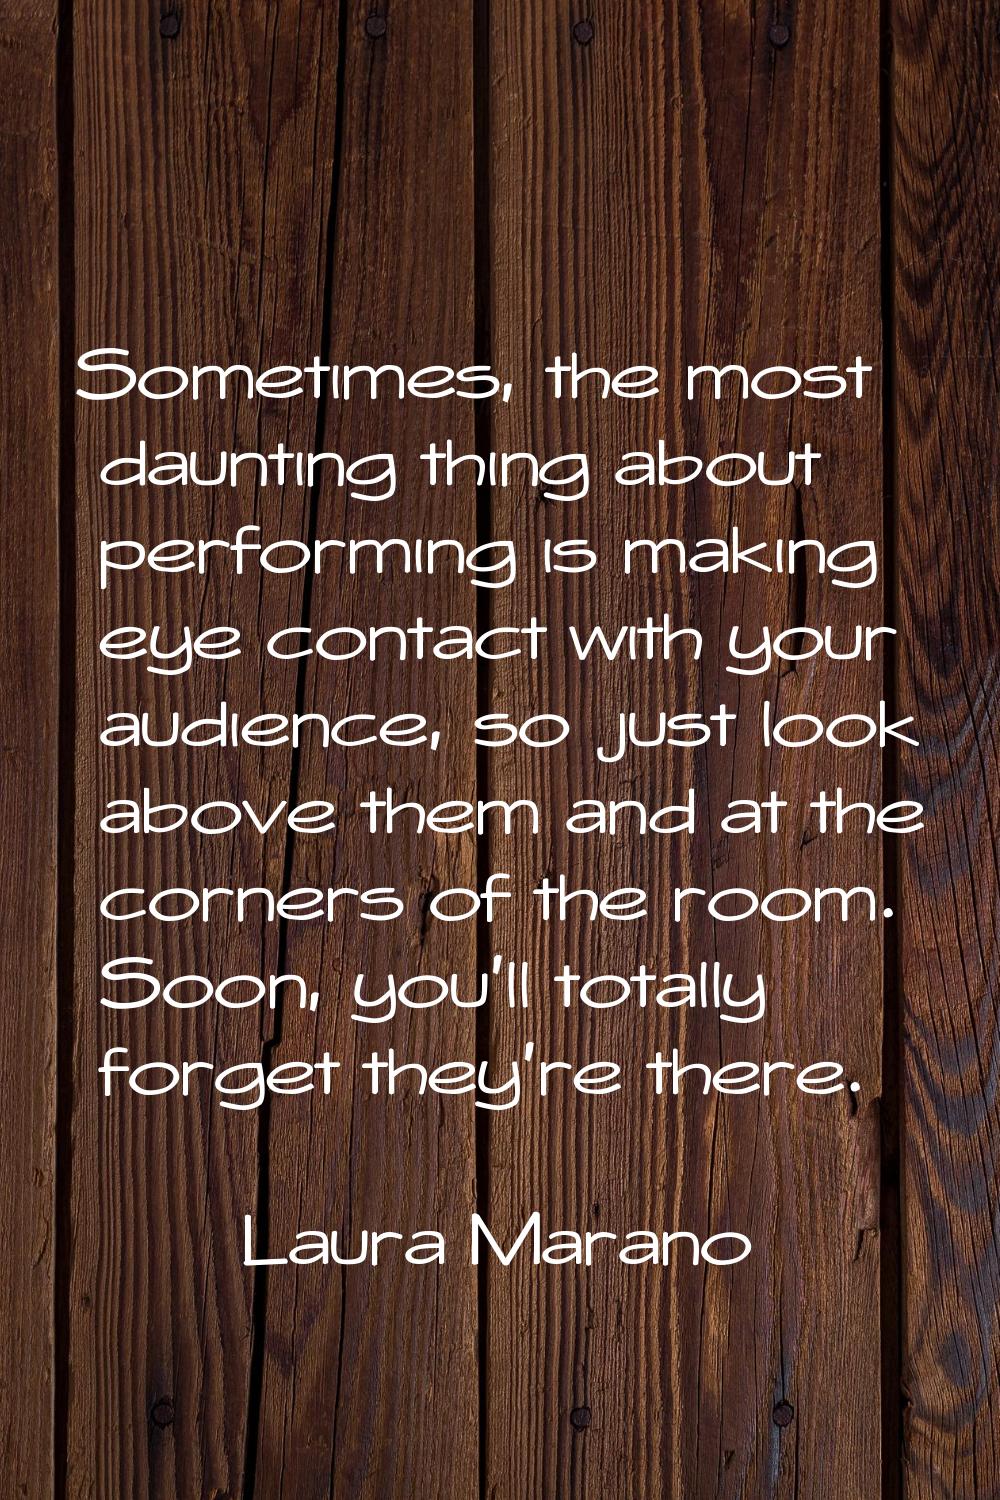 Sometimes, the most daunting thing about performing is making eye contact with your audience, so ju